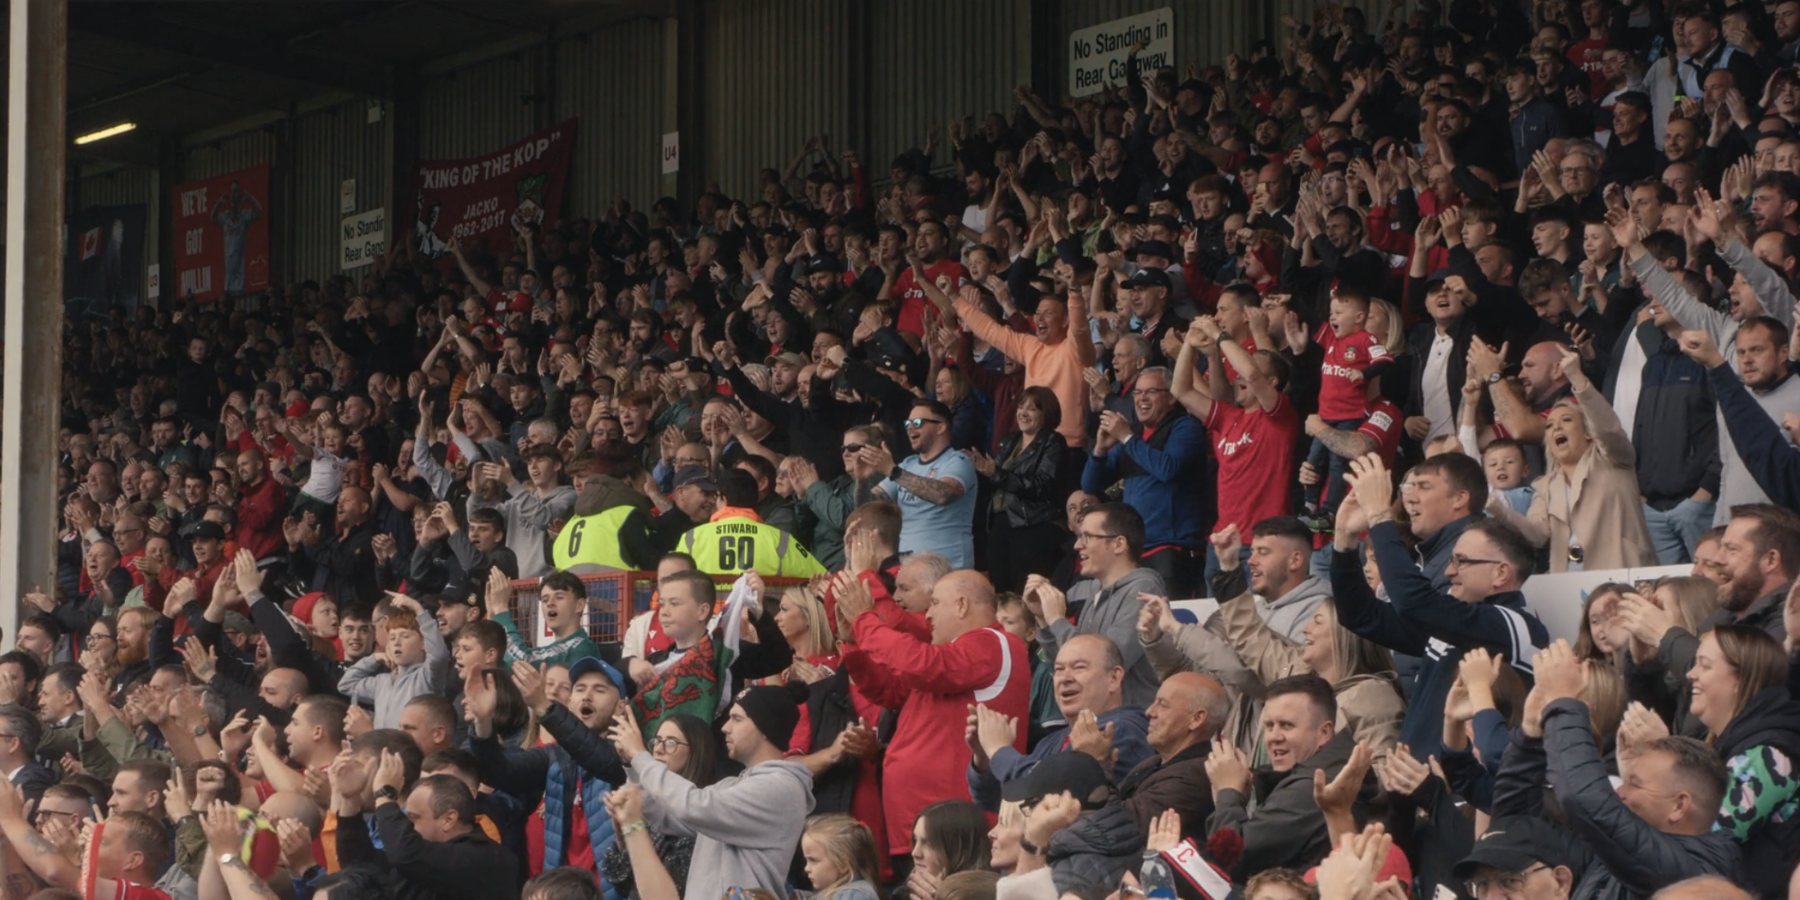 Wrexham AFC crowd in stand in Welcome to Wrexham season 2 episode.